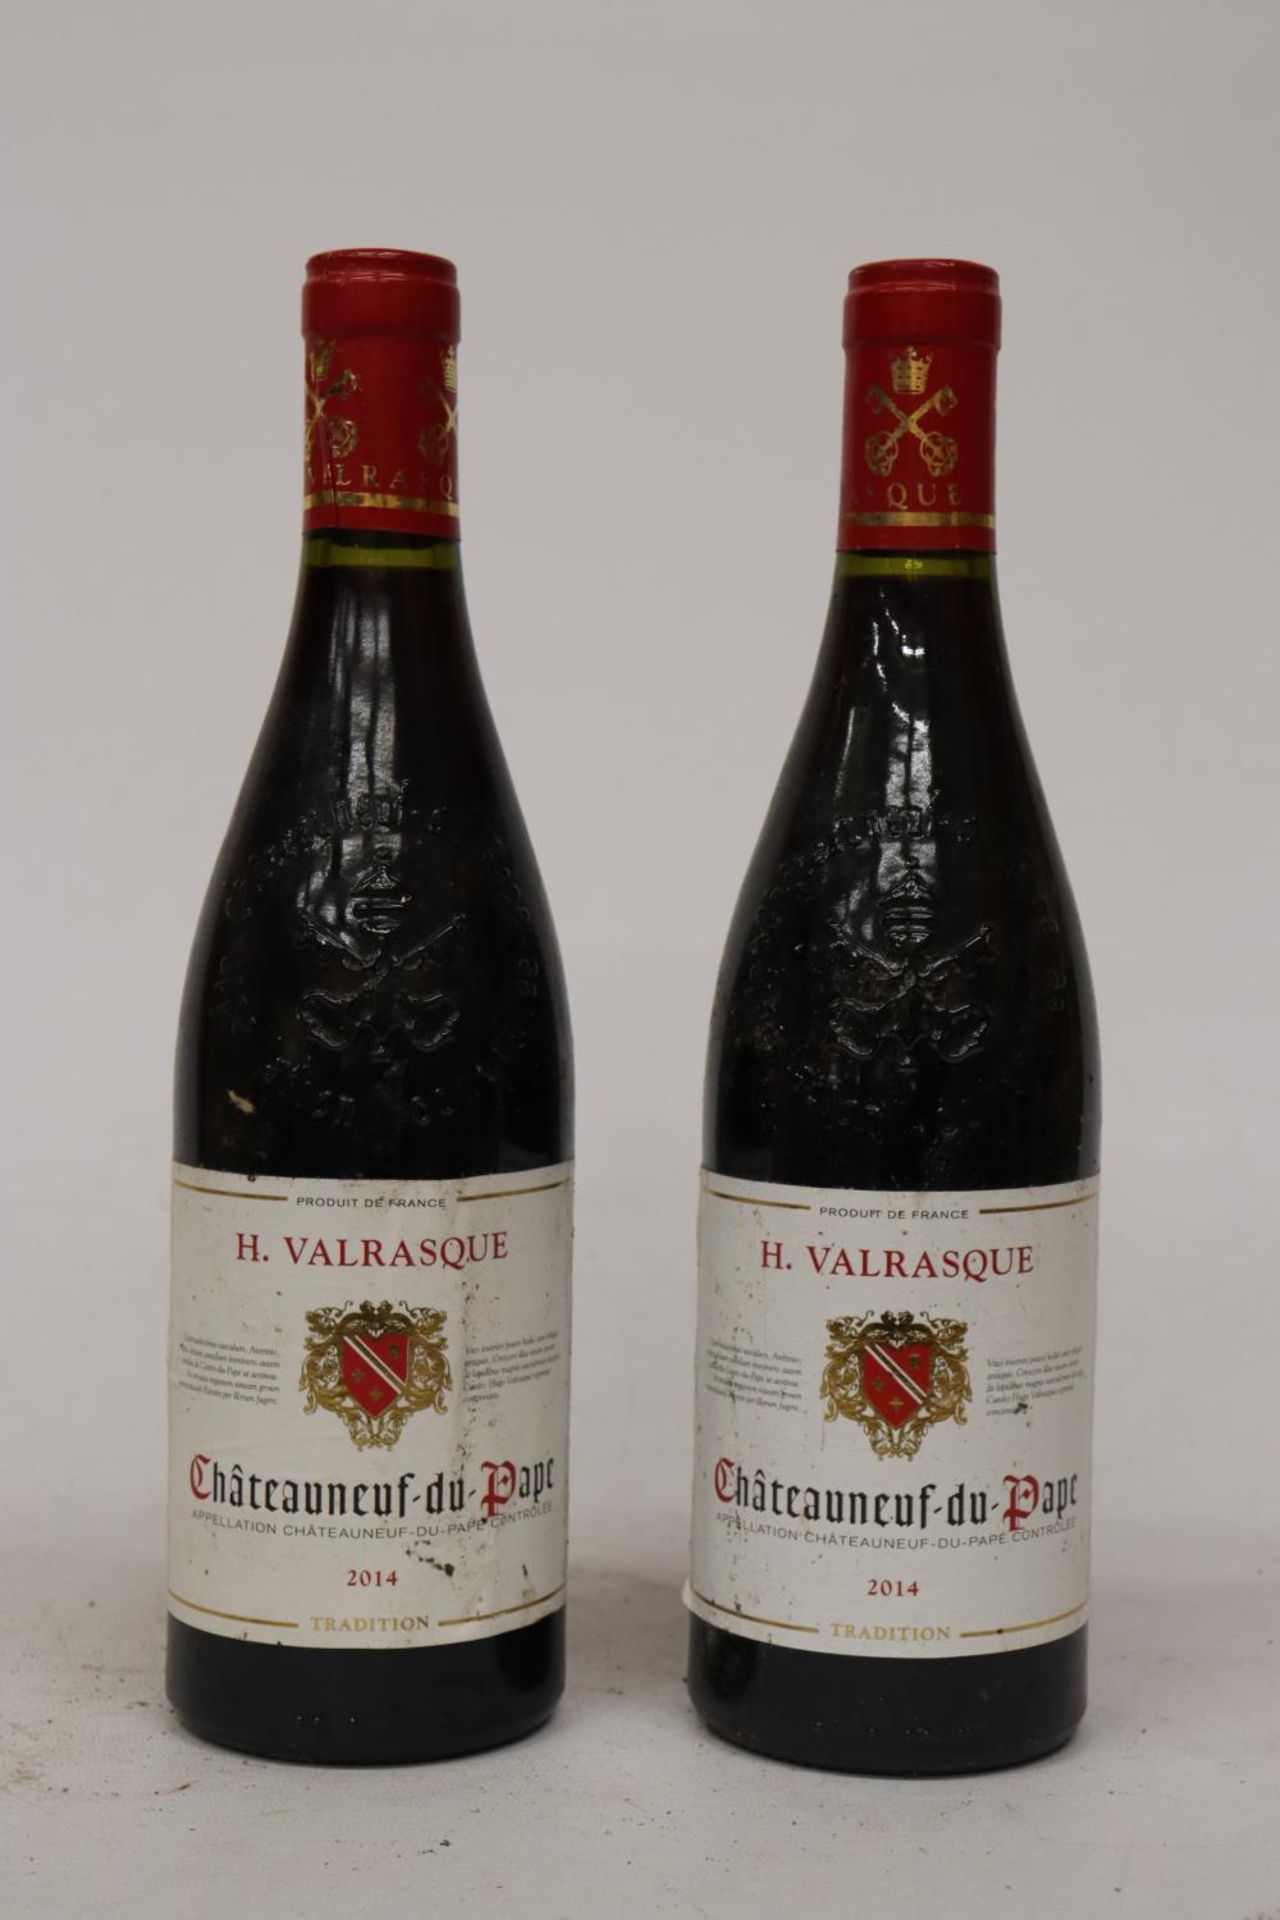 TWO BOTTLES OF H. VALRASQUE CHATEAUNEUF-DU-PAPE 2014 RED WINE